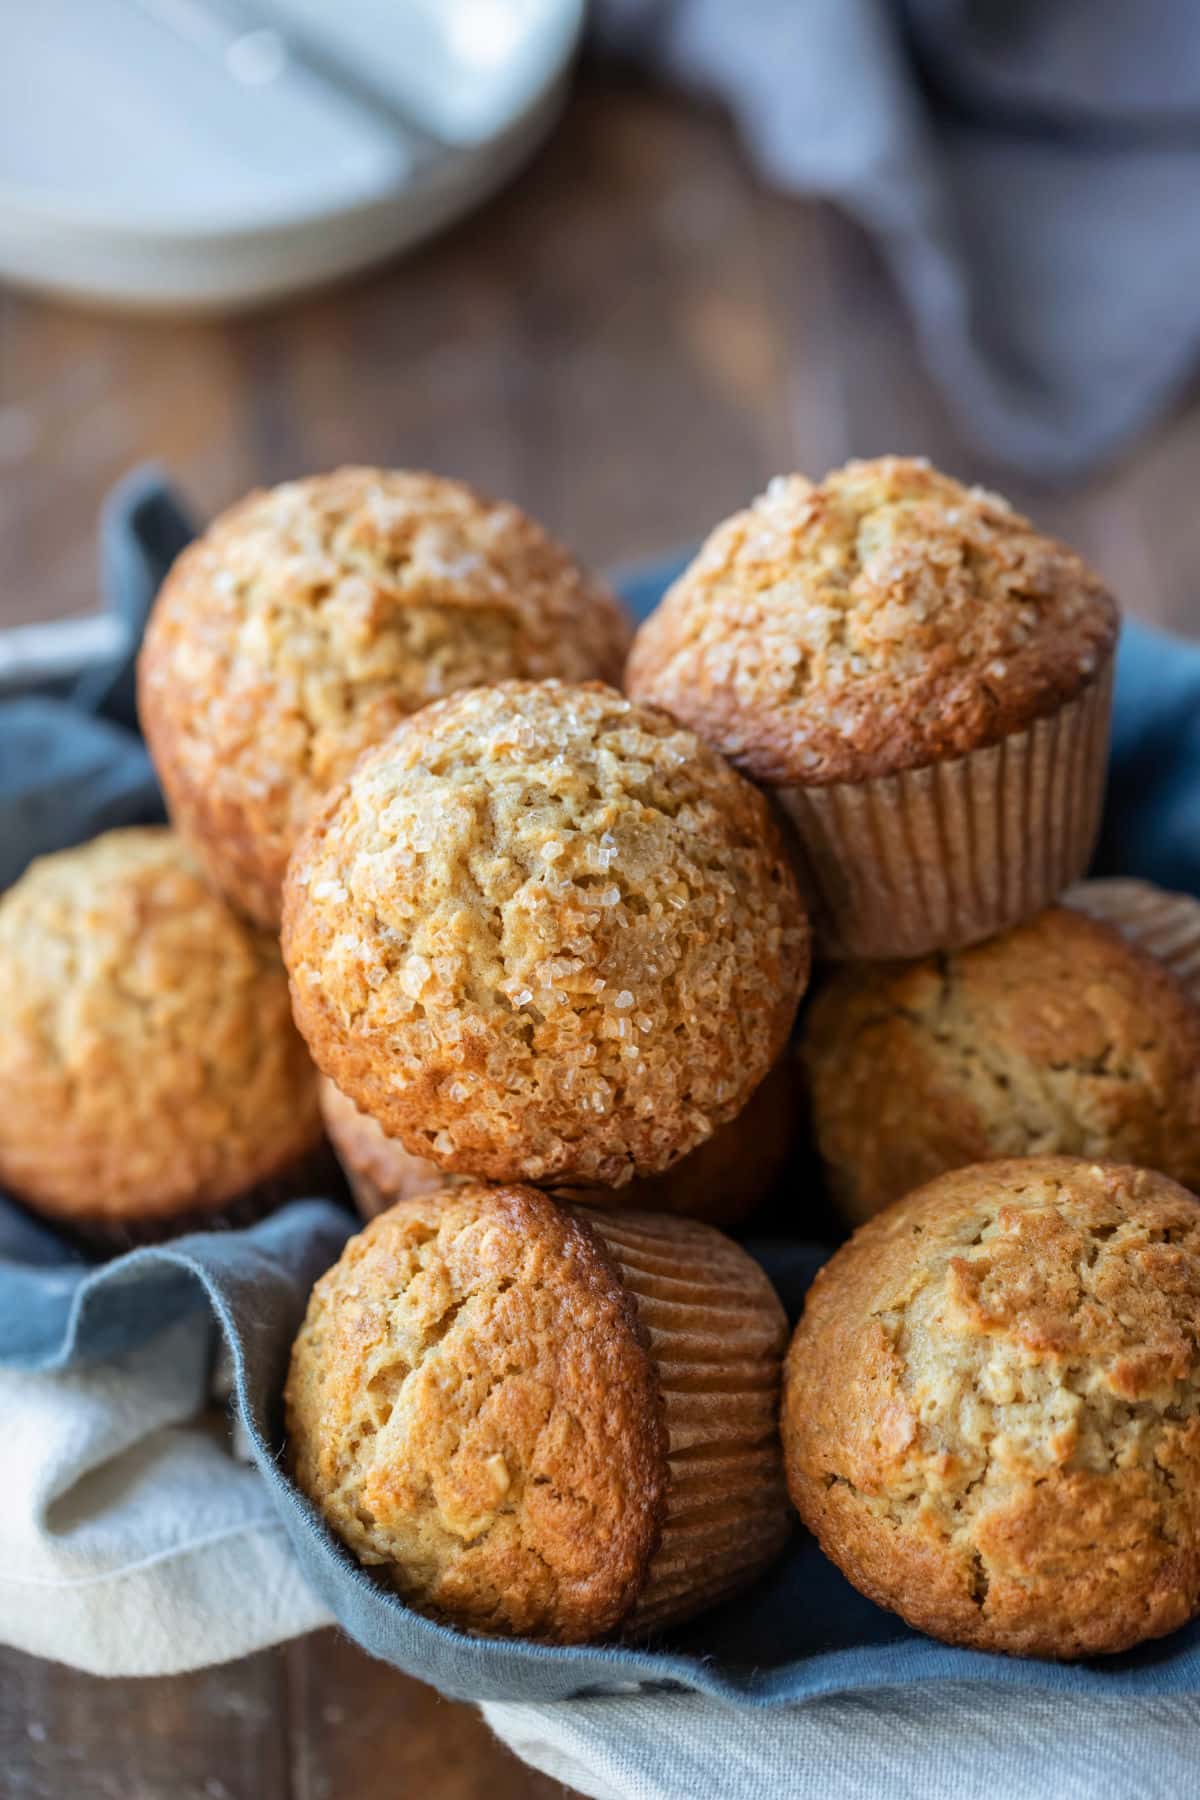 Oatmeal muffins in linen-lined basket.